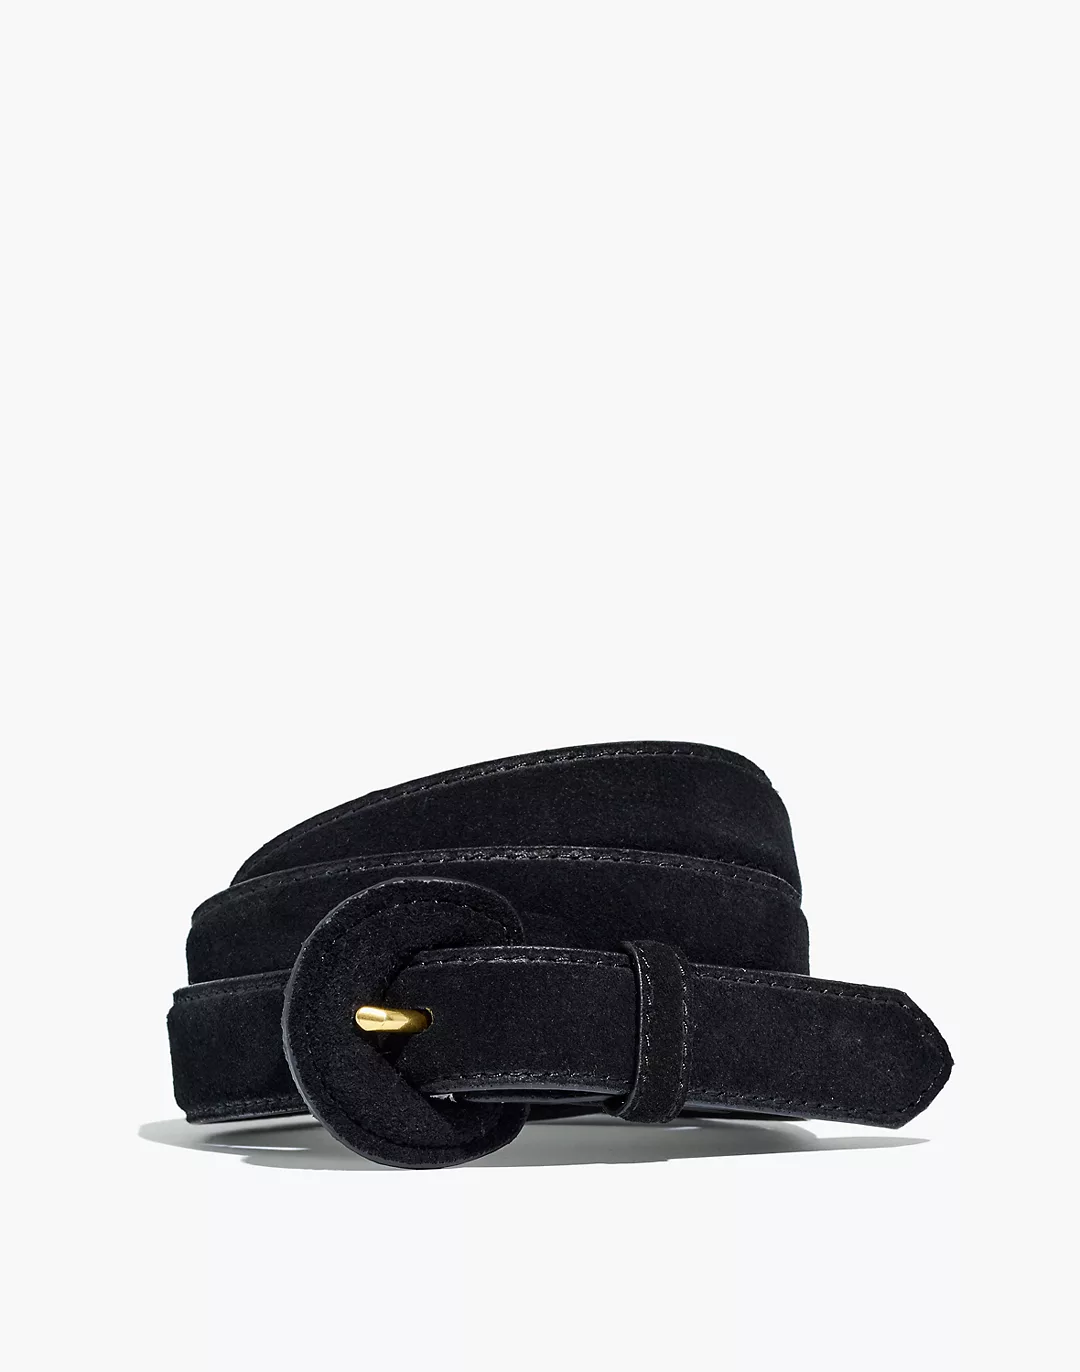 Le Fashion: 25 Under-$100 Black Belts for Fall Accessorizing